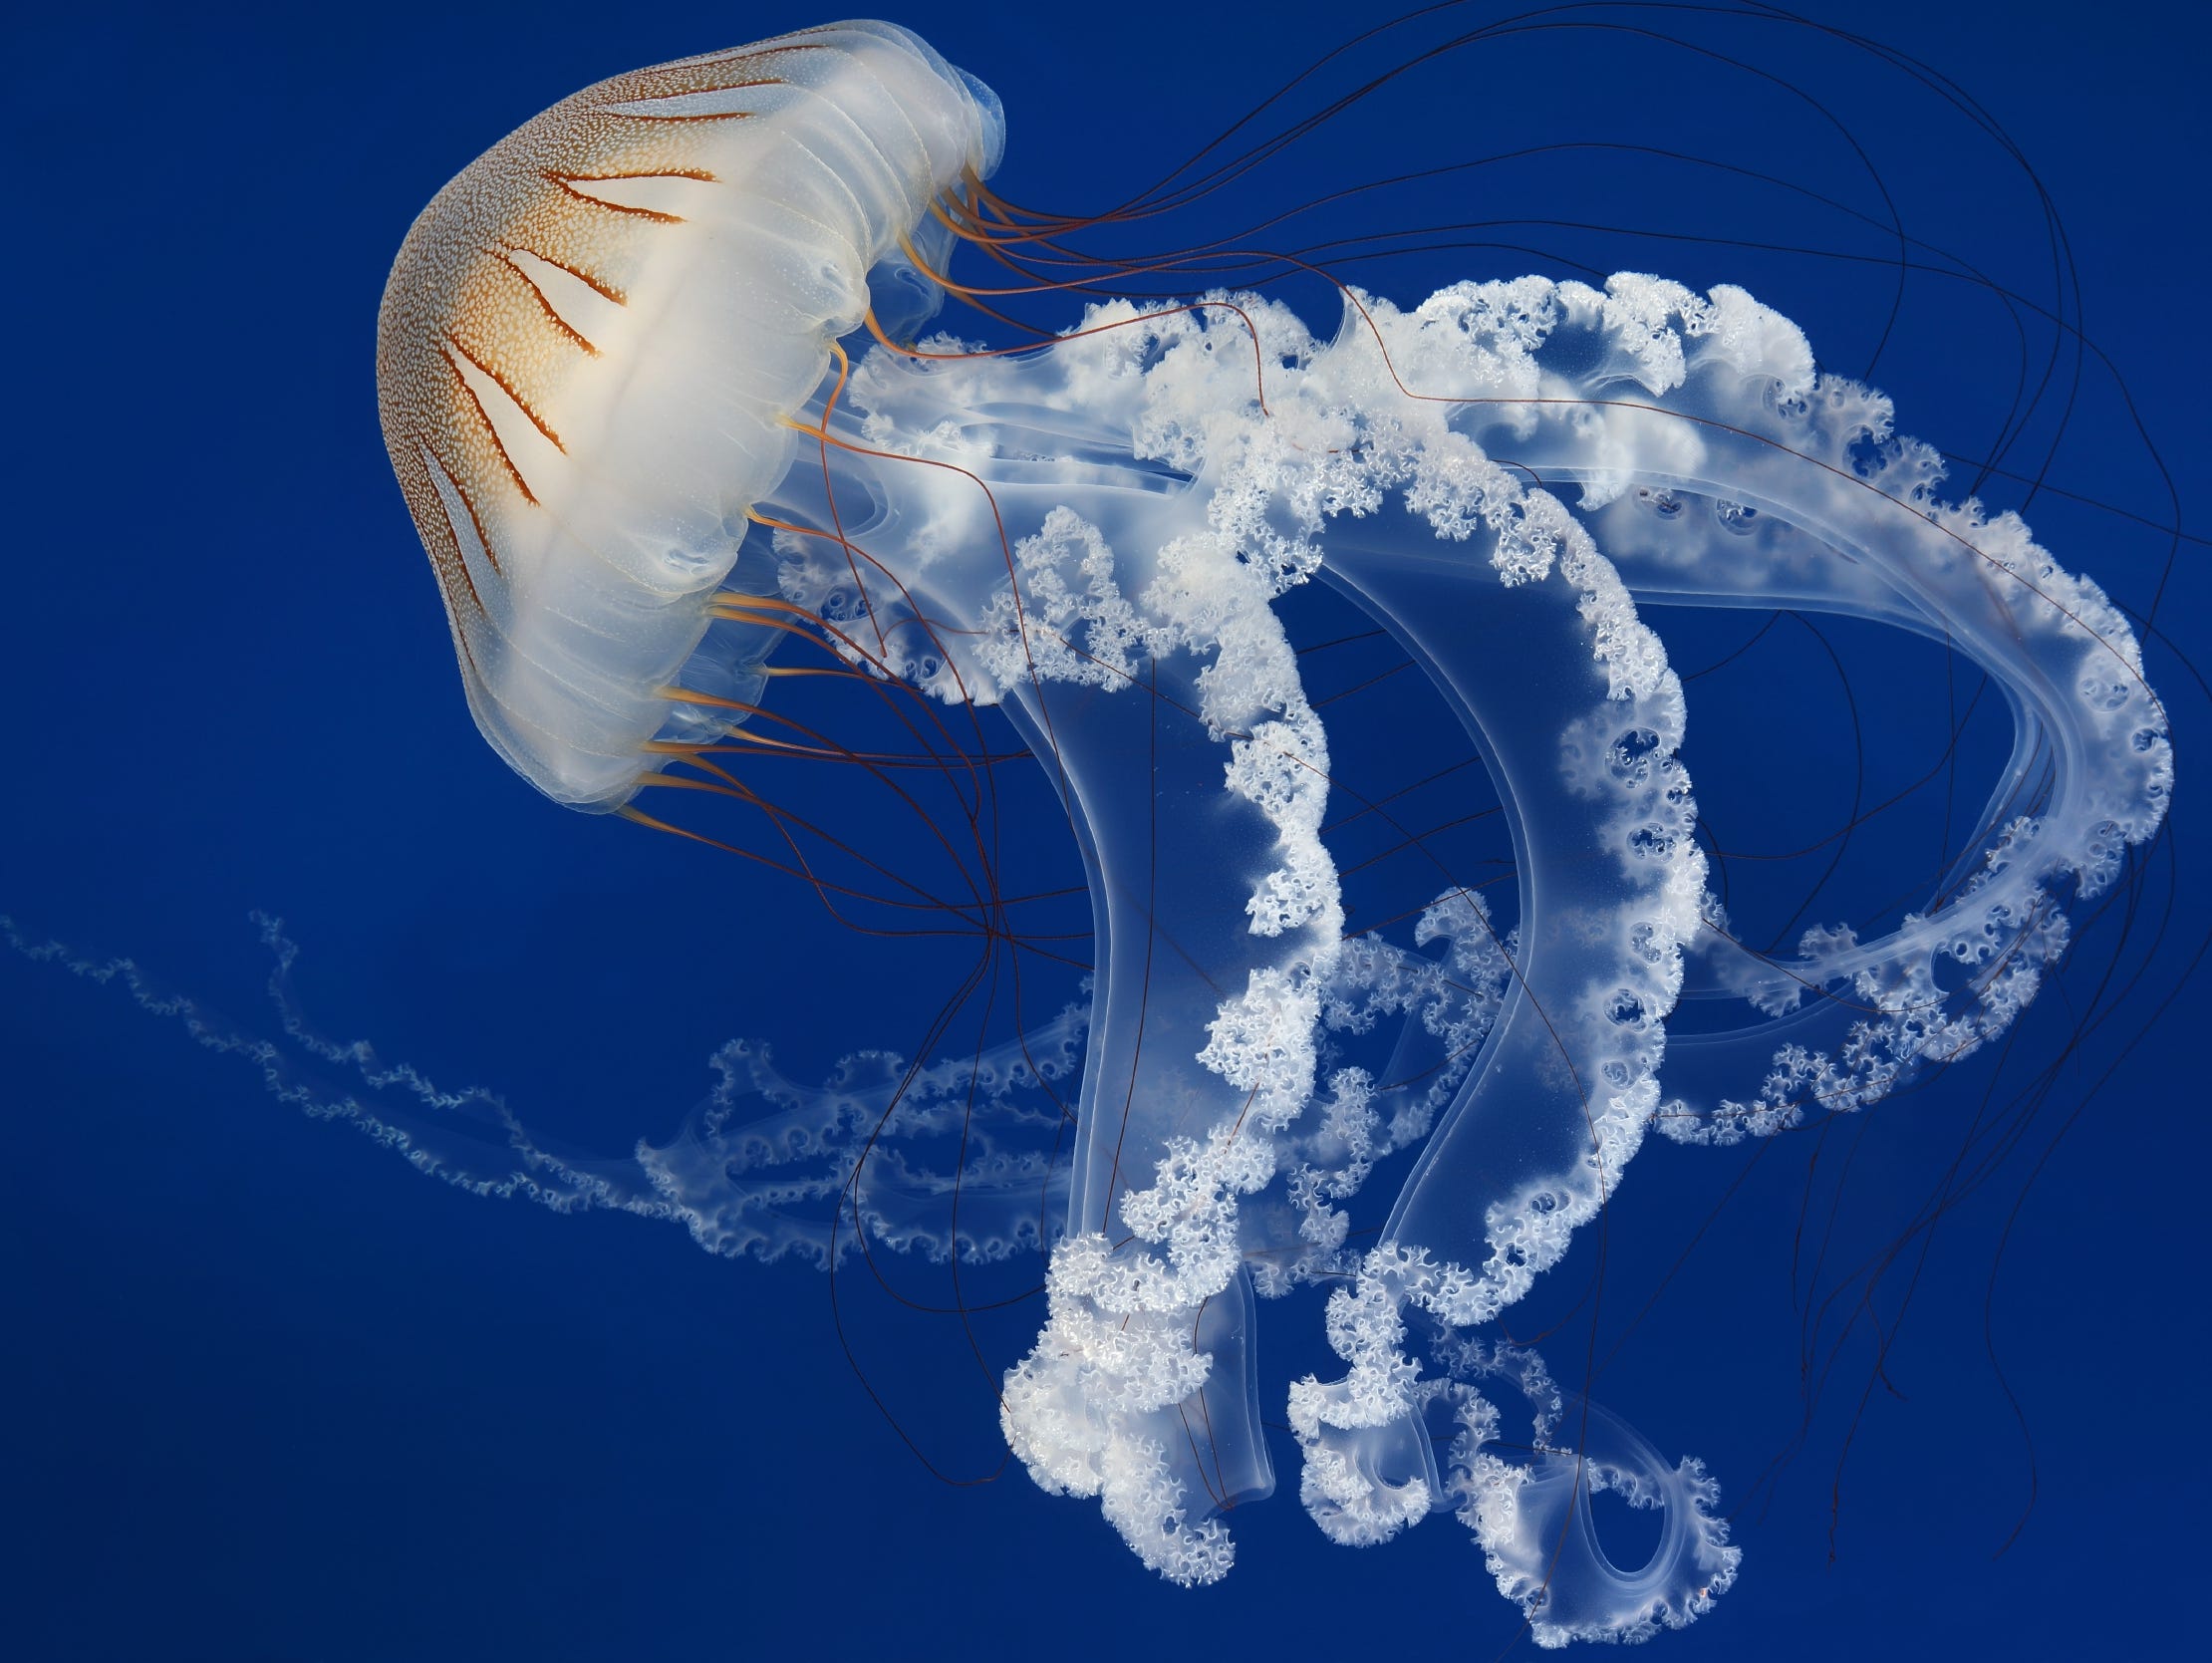 Mature South American sea nettles (Chrysaora plocamia), aka brown jellyfish, in Spanish they are called medusa parda. In the wild these jellies can grow to three feet (91 cm) in diameter.